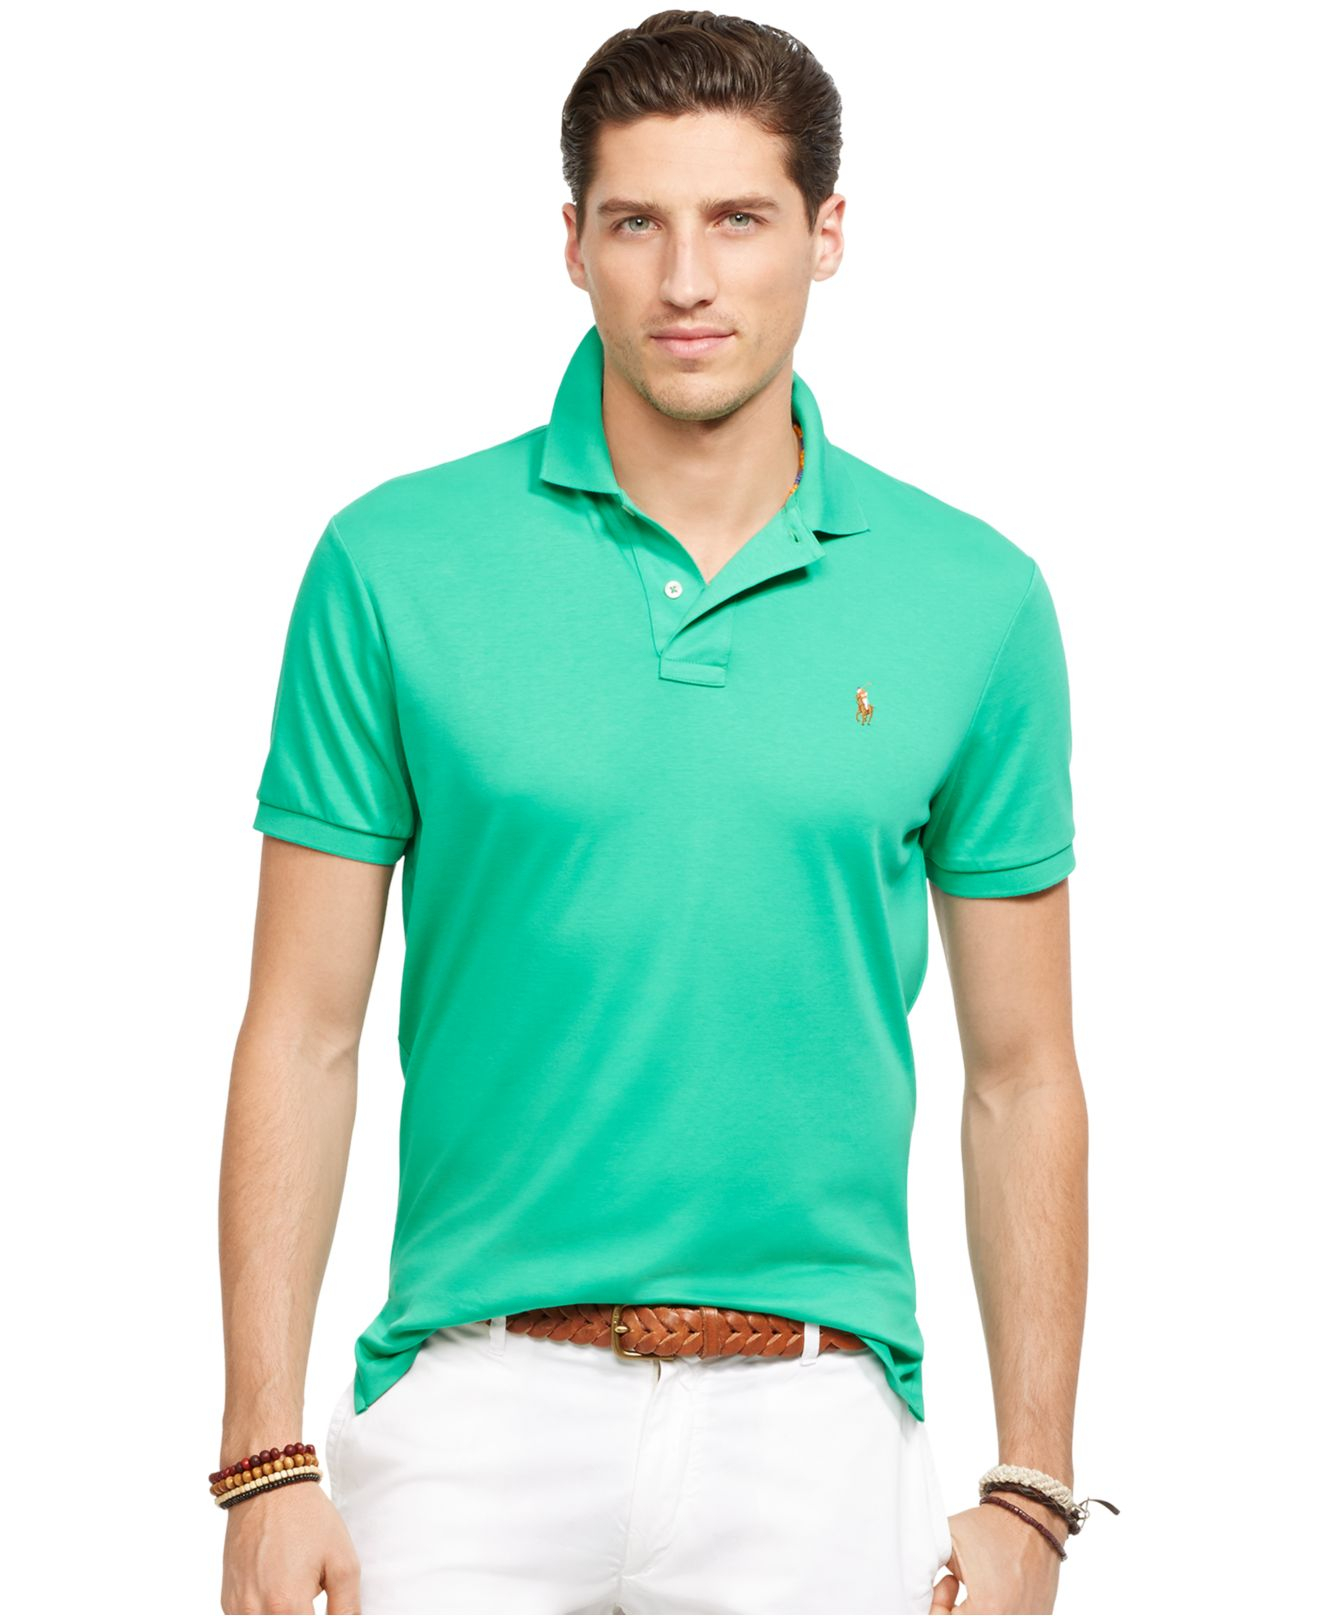 Lyst - Polo Ralph Lauren Pima Soft-Touch Polo Shirt in Green for Men